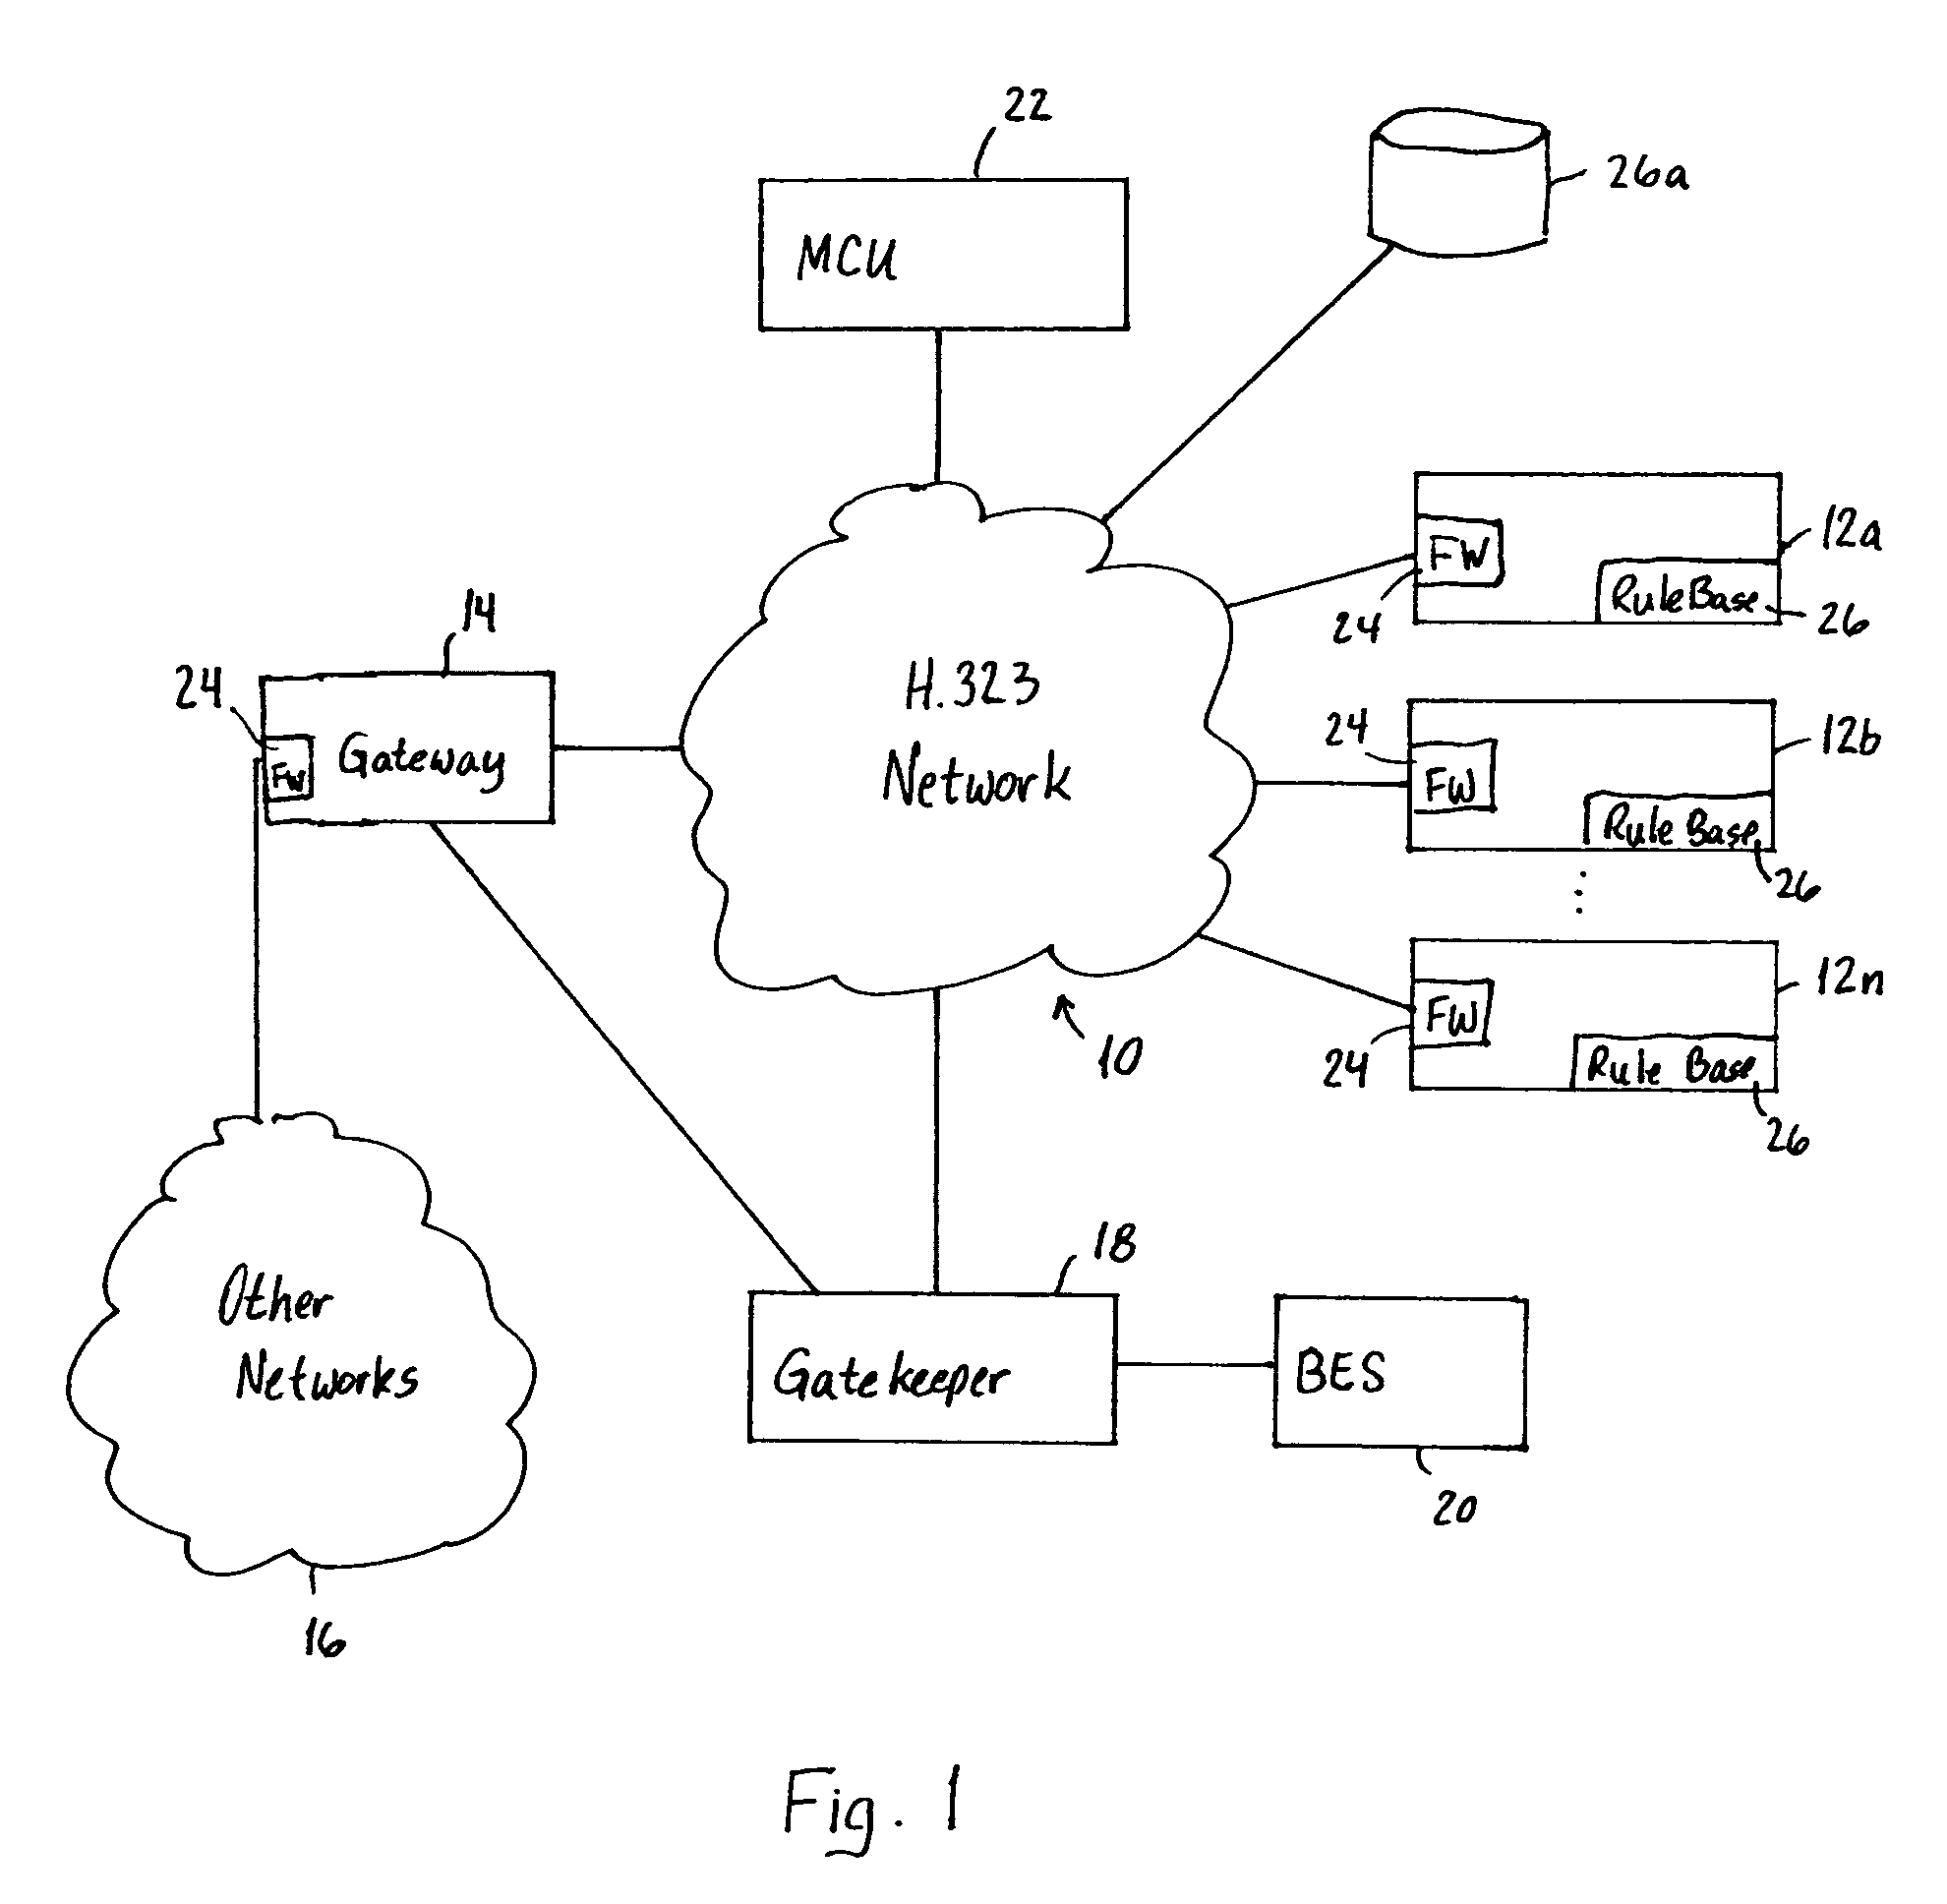 System and method for mitigating denial of service attacks on communication appliances